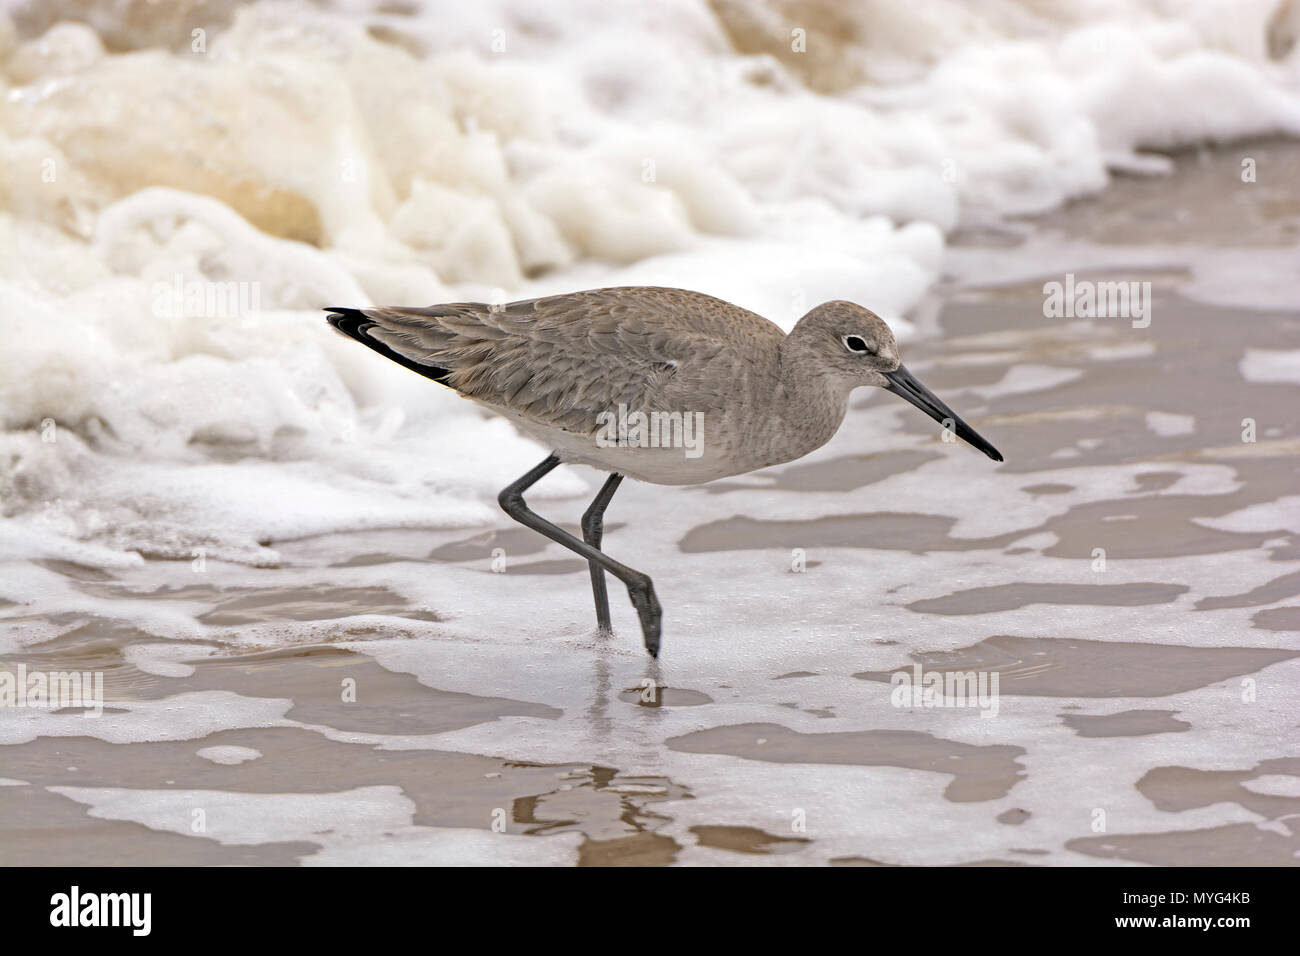 Willet Wandering through the Sea Foam on the Gulf Coast of Texas Stock Photo